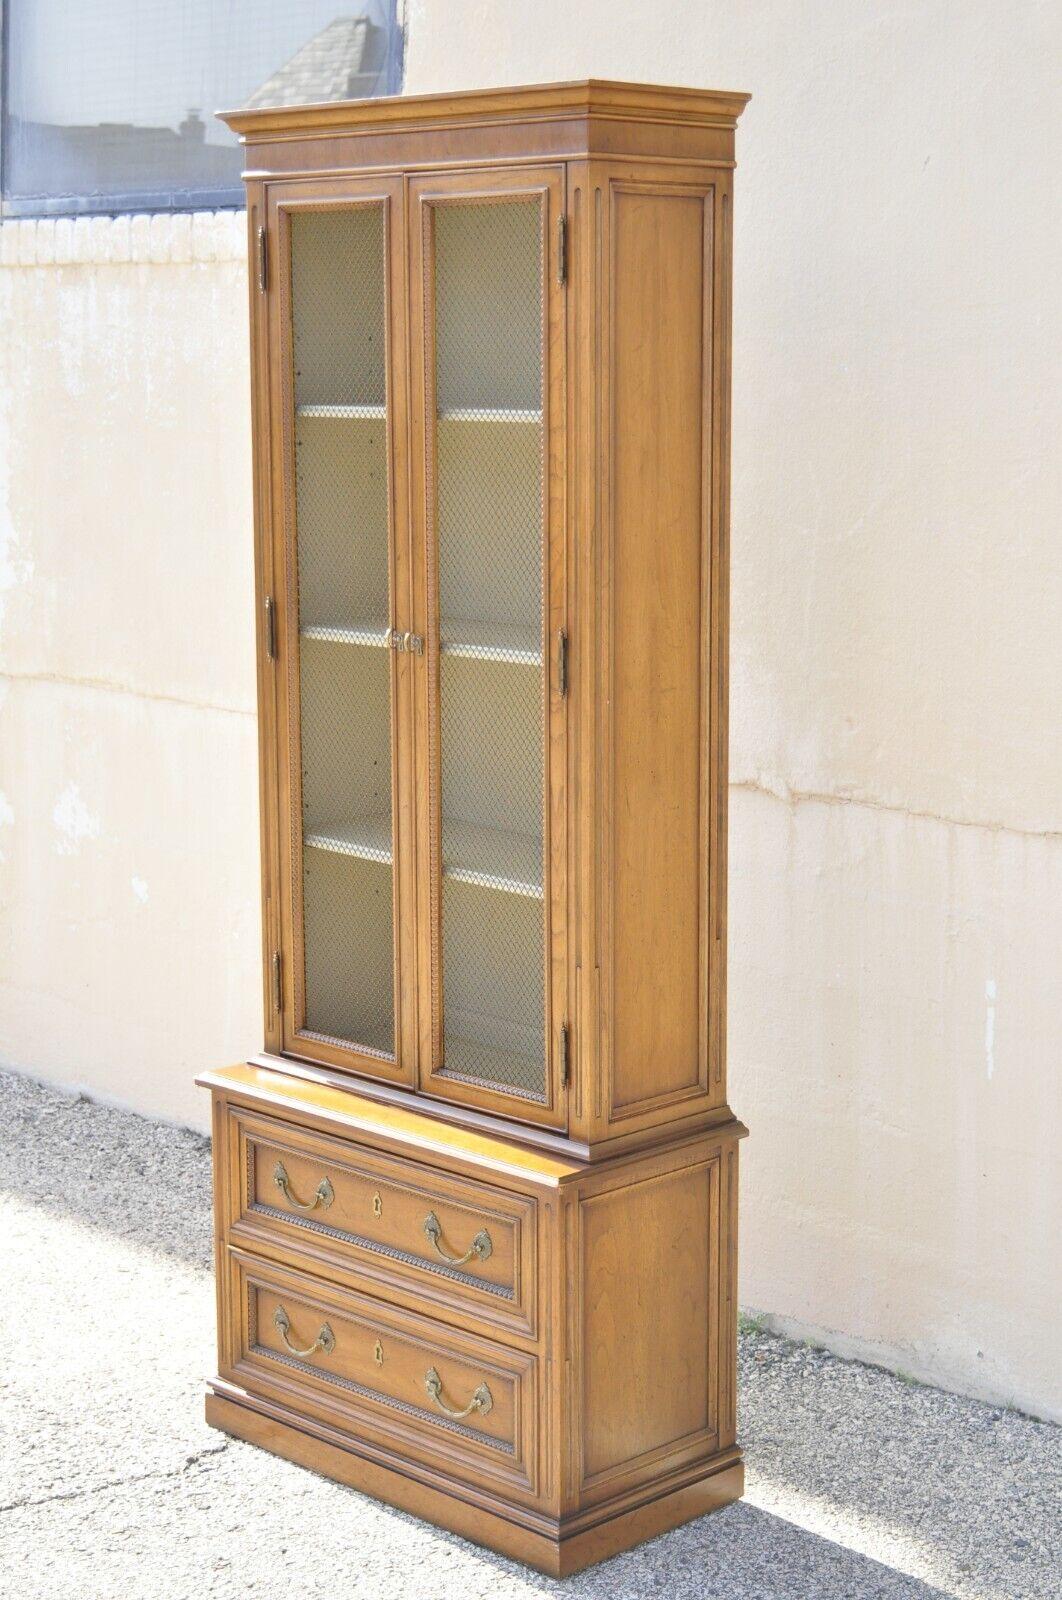 Henredon Custom Folio One Walnut French Provincial Style Tall Narrow Display Cabinet Curio. Item features metal grille door fronts, beautiful wood grain, distressed finish, 2 swing doors, original stamp, 2 dovetailed drawers, 2 adjustable shelves,